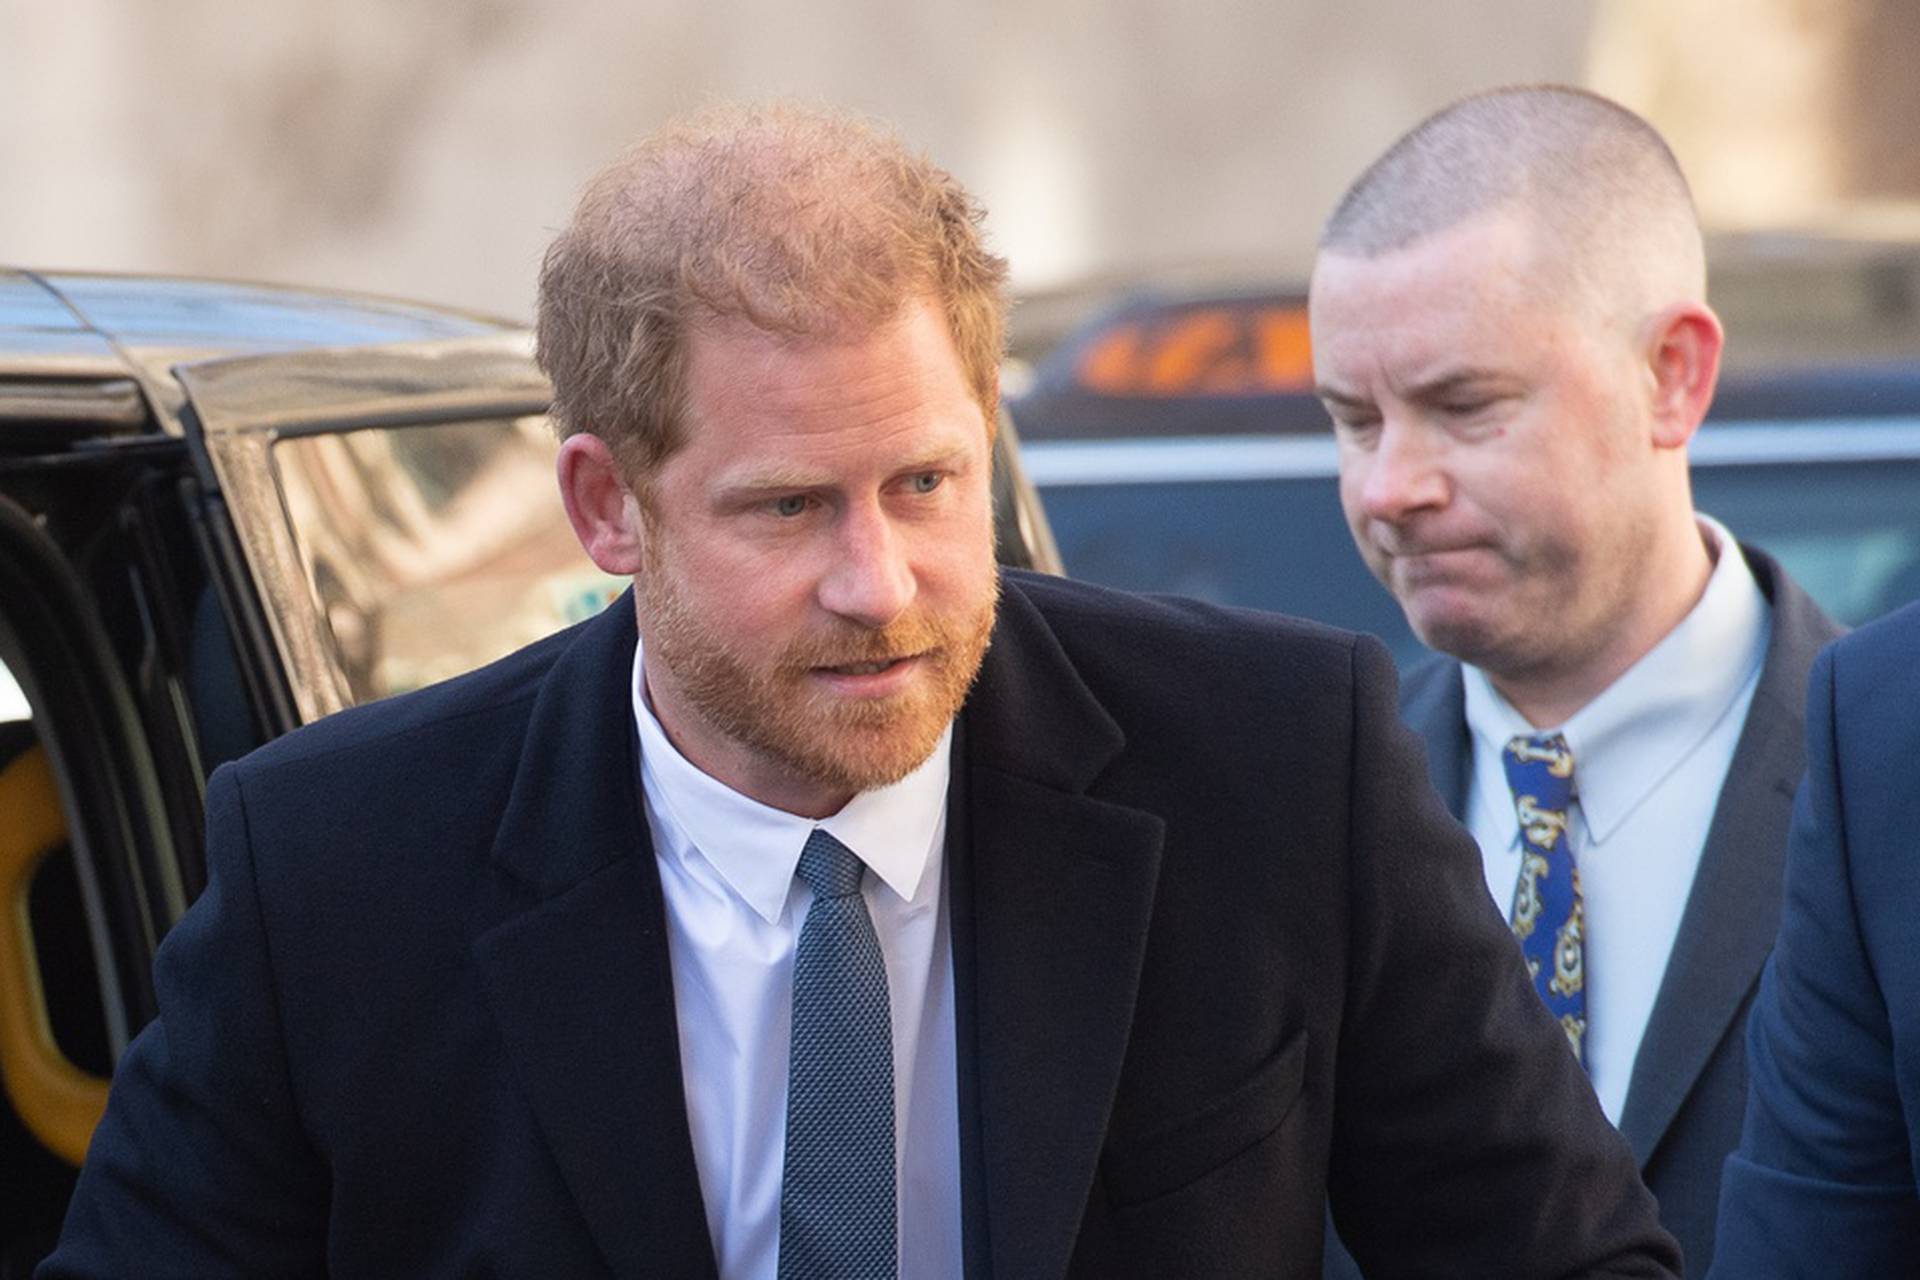 Prince Harry Arrives at Court - Monday 27 March - Royal Courts Of Justice, London